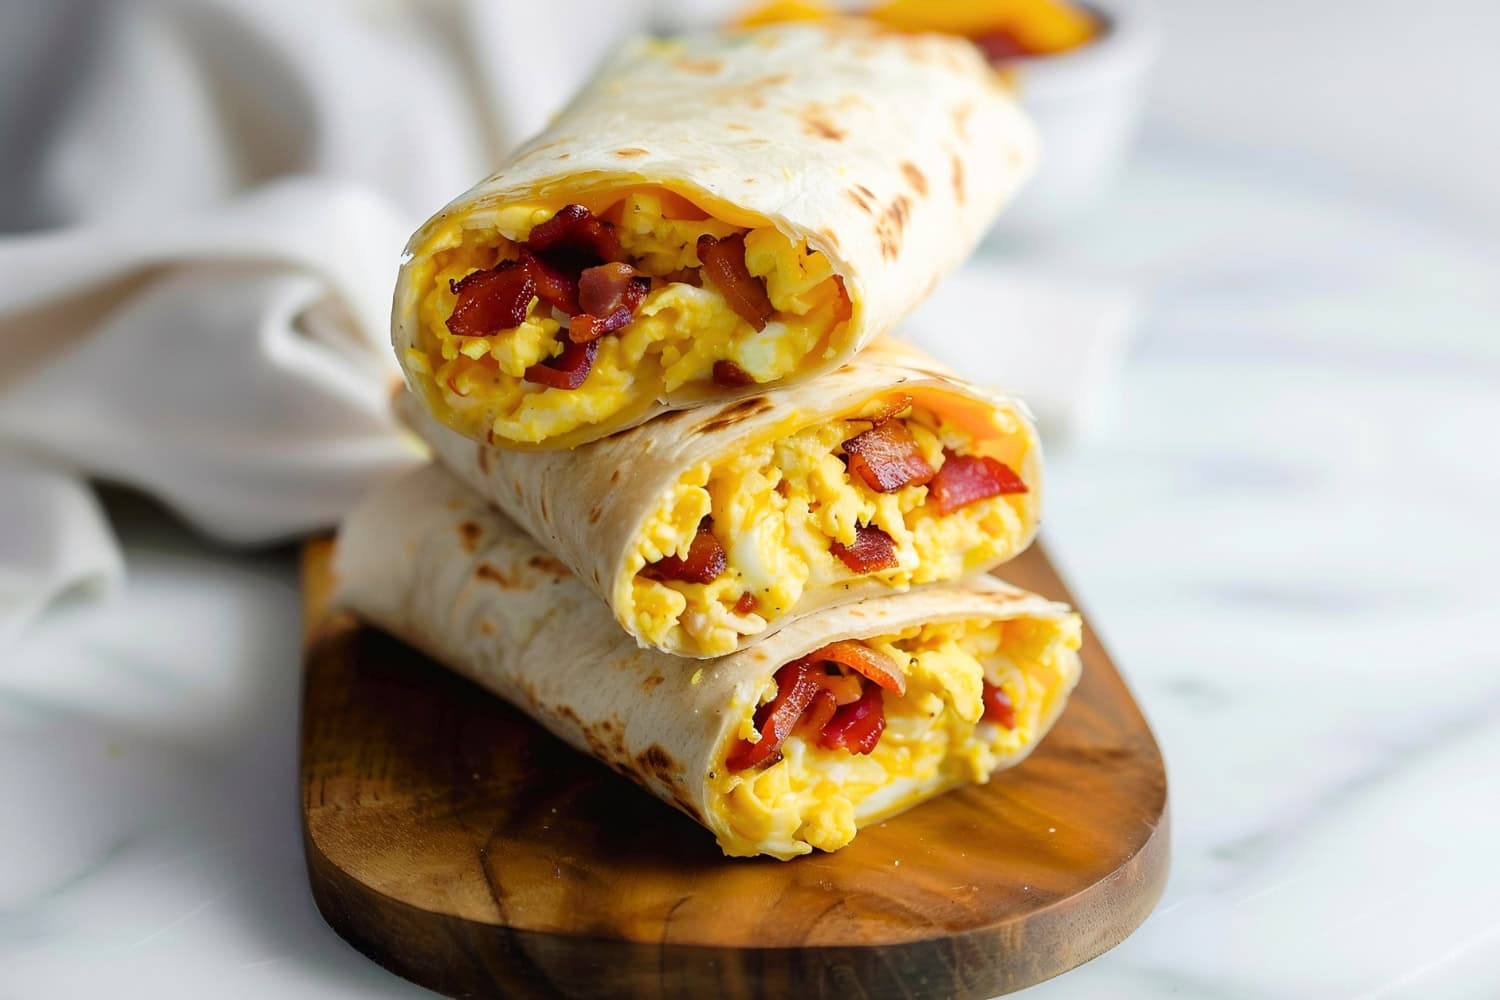 A warm bacon and egg breakfast wrap with cheese ready to eat.